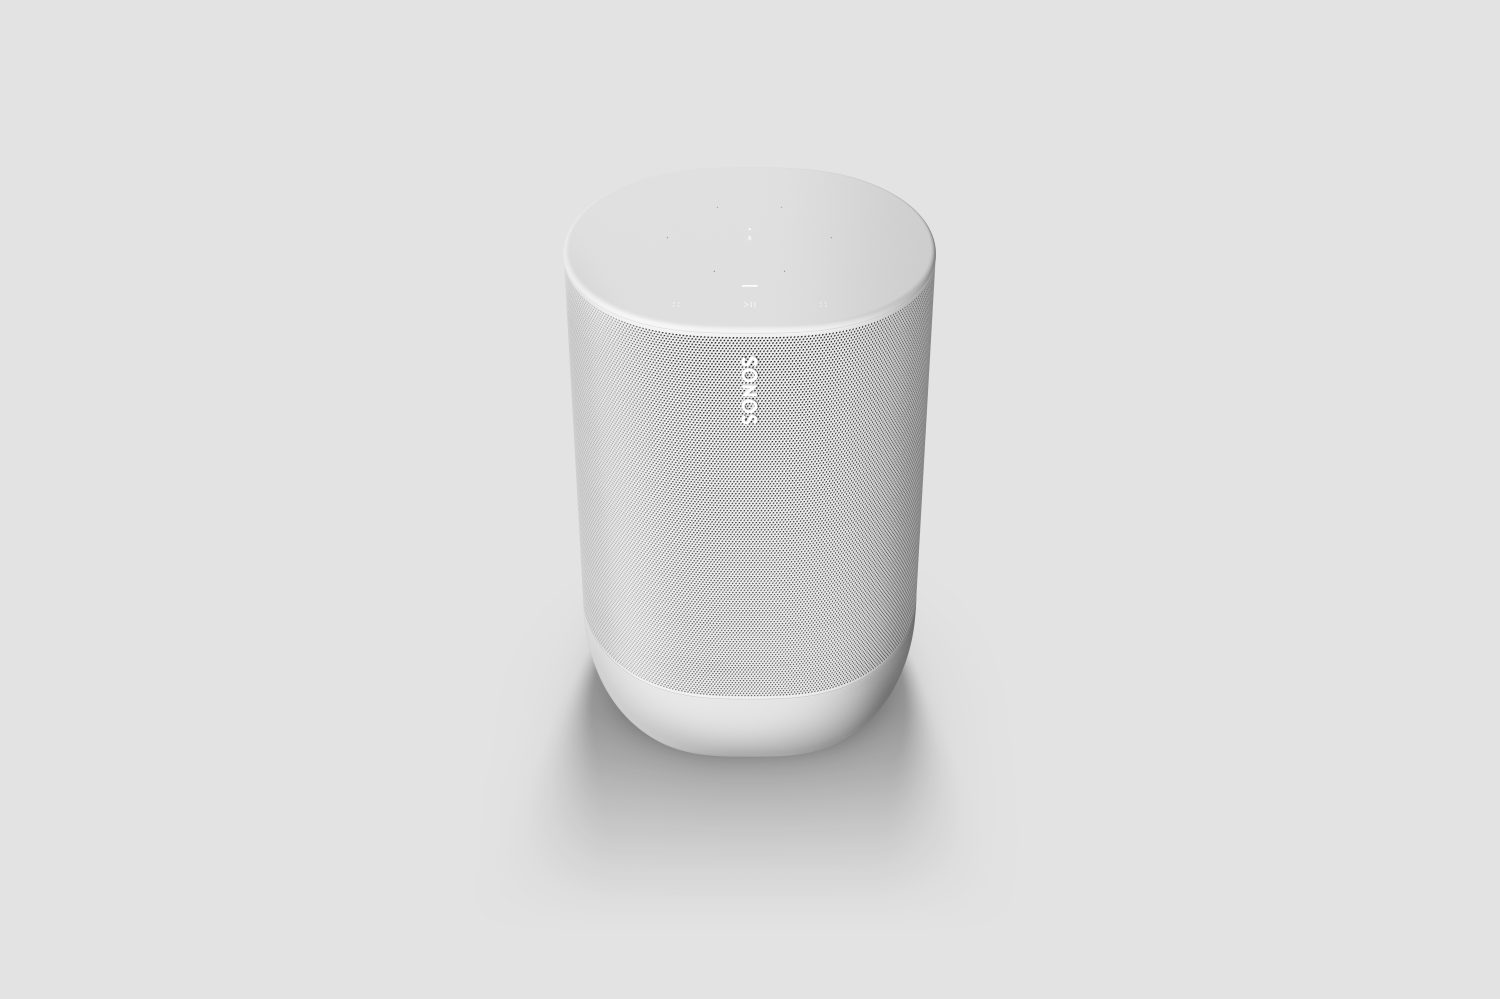 Doven regering værtinde Sonos Move AirPlay 2/Bluetooth speaker now boasts 11 hour battery life,  Lunar White version - 9to5Mac